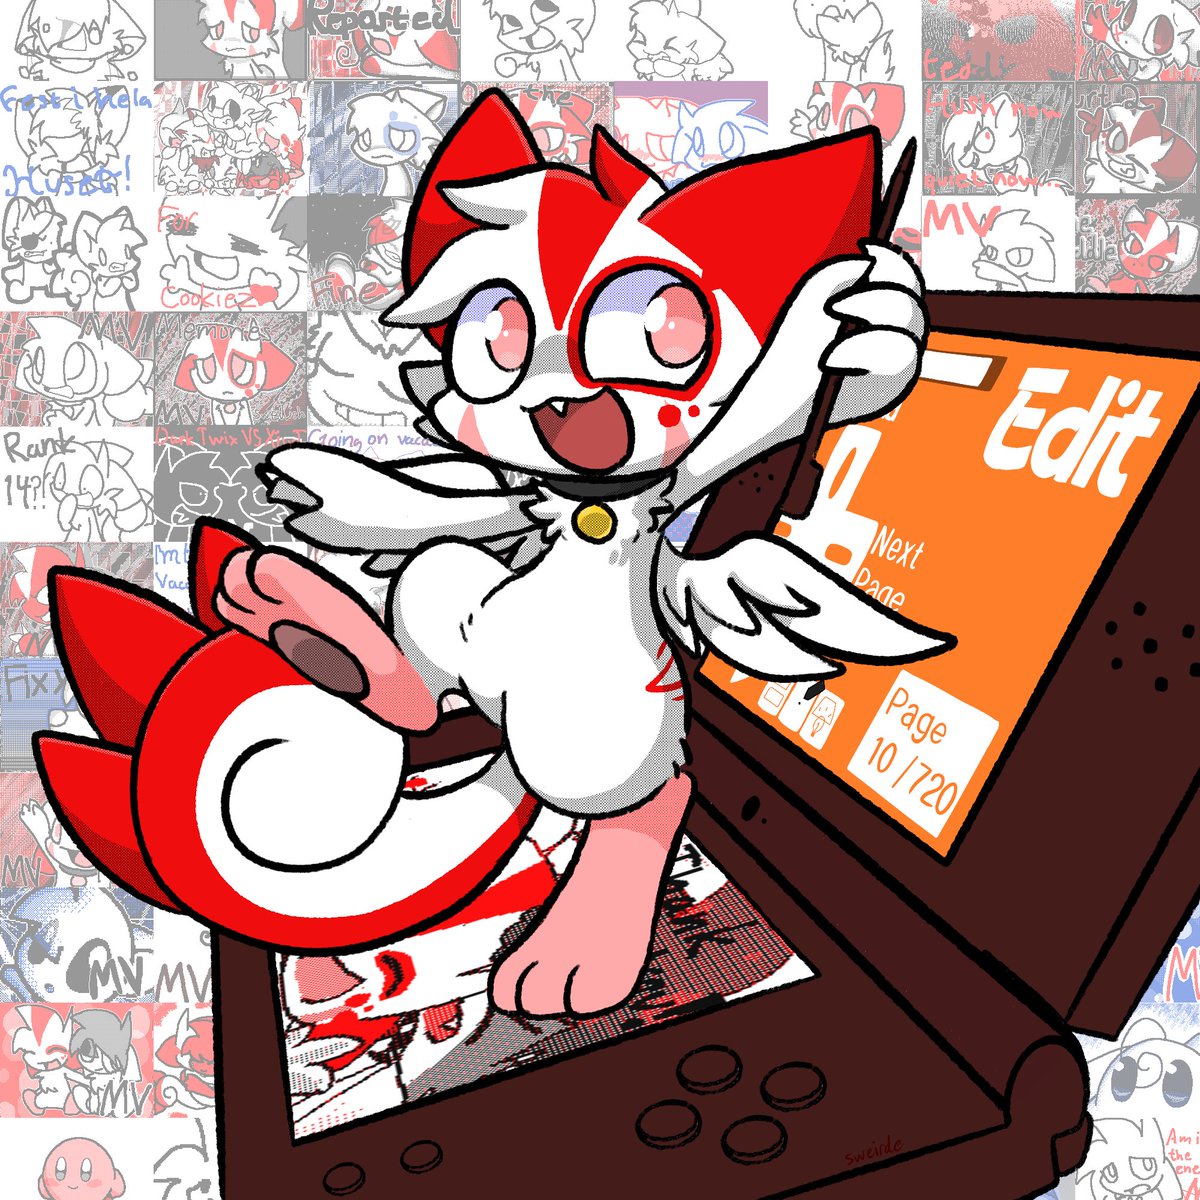 it's been 10 years since Flipnote Hatena's closure
i made a drawing to commemorate!
i made a lot of memories on that service, and it's what helped me pursue in the things I enjoy💖